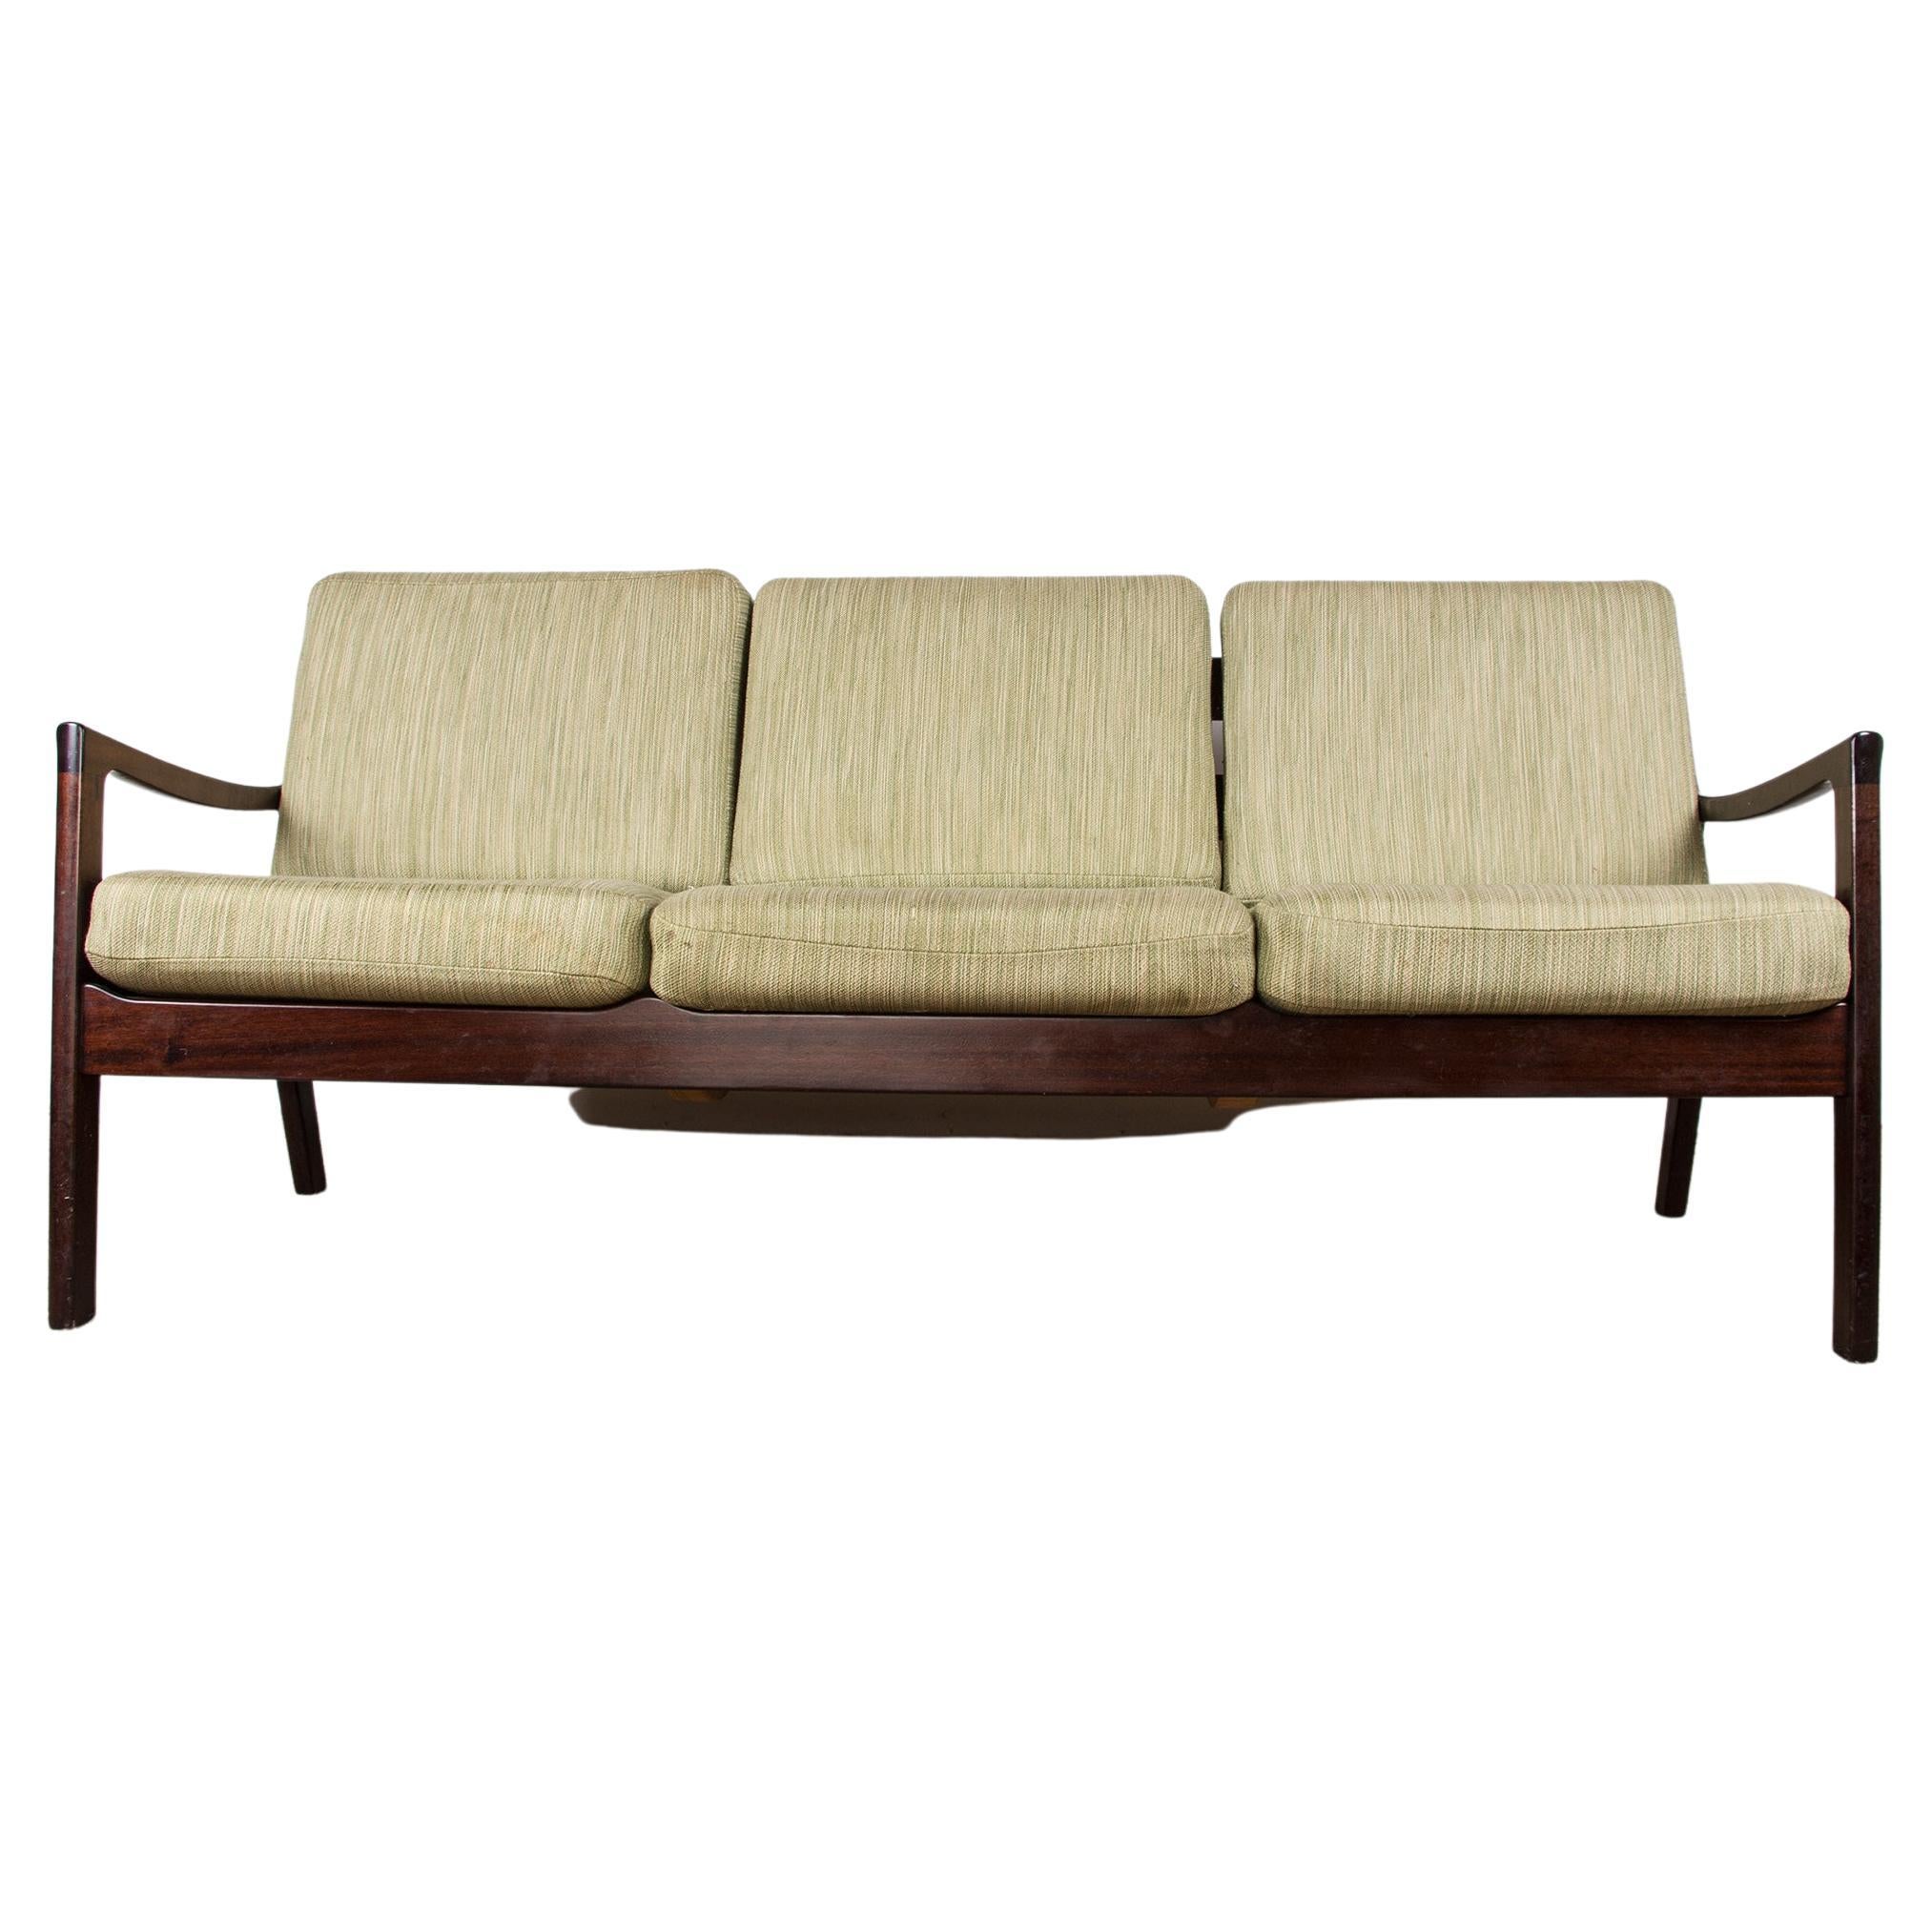 Danish Mahogany & Pattern Fabric 3-Seat Sofa by Ole Wanscher for Poul Jepessen, 